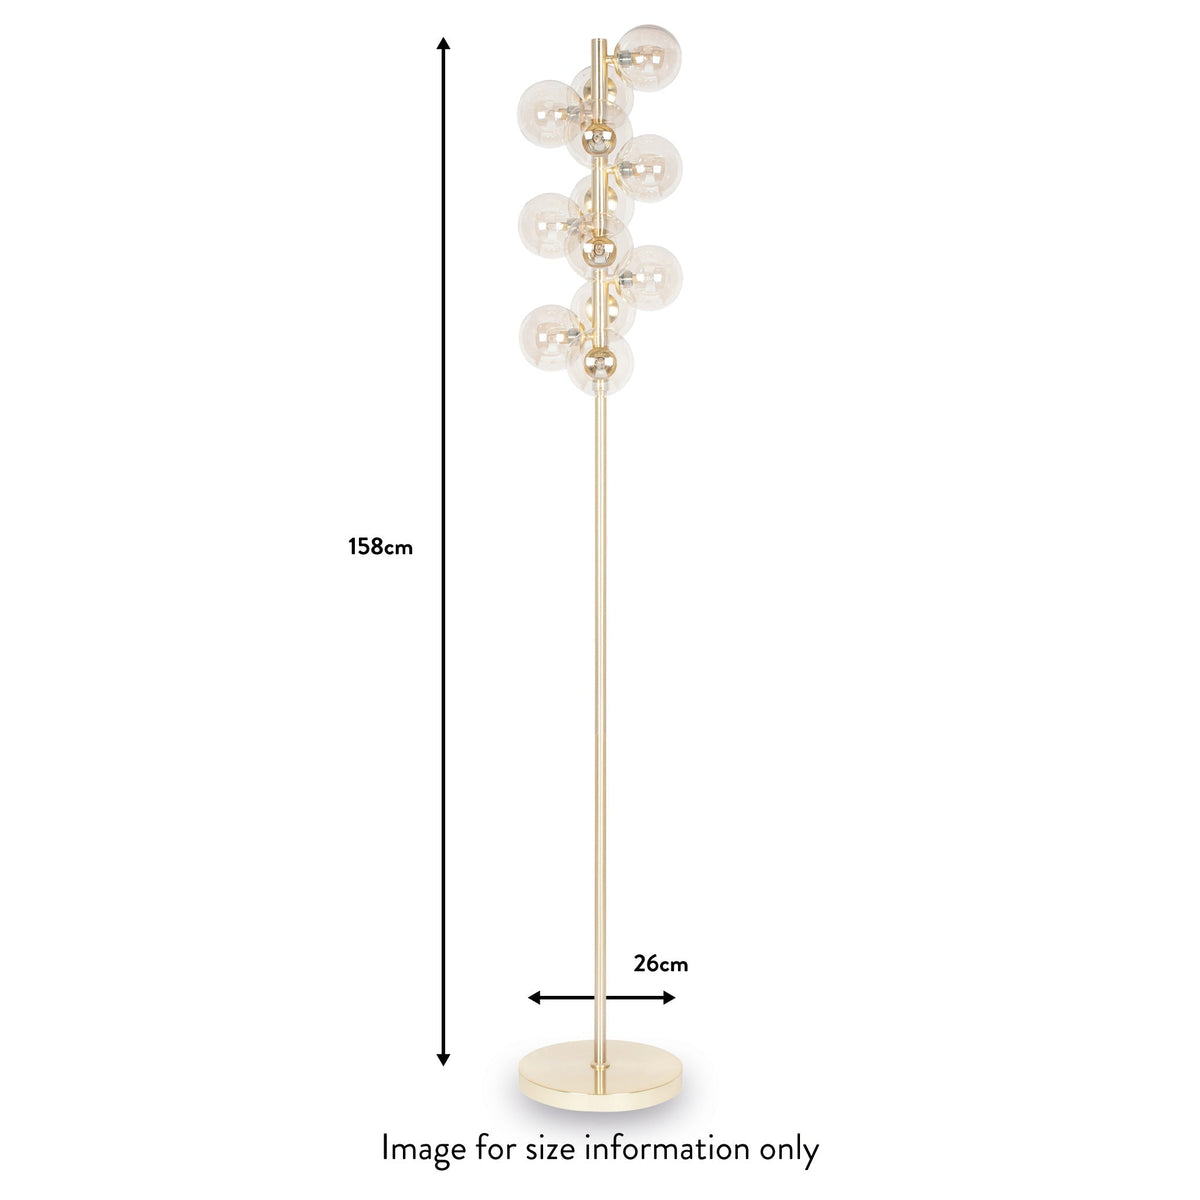 Vecchio Lustre Glass Orb and Gold Floor Lamp dimensions